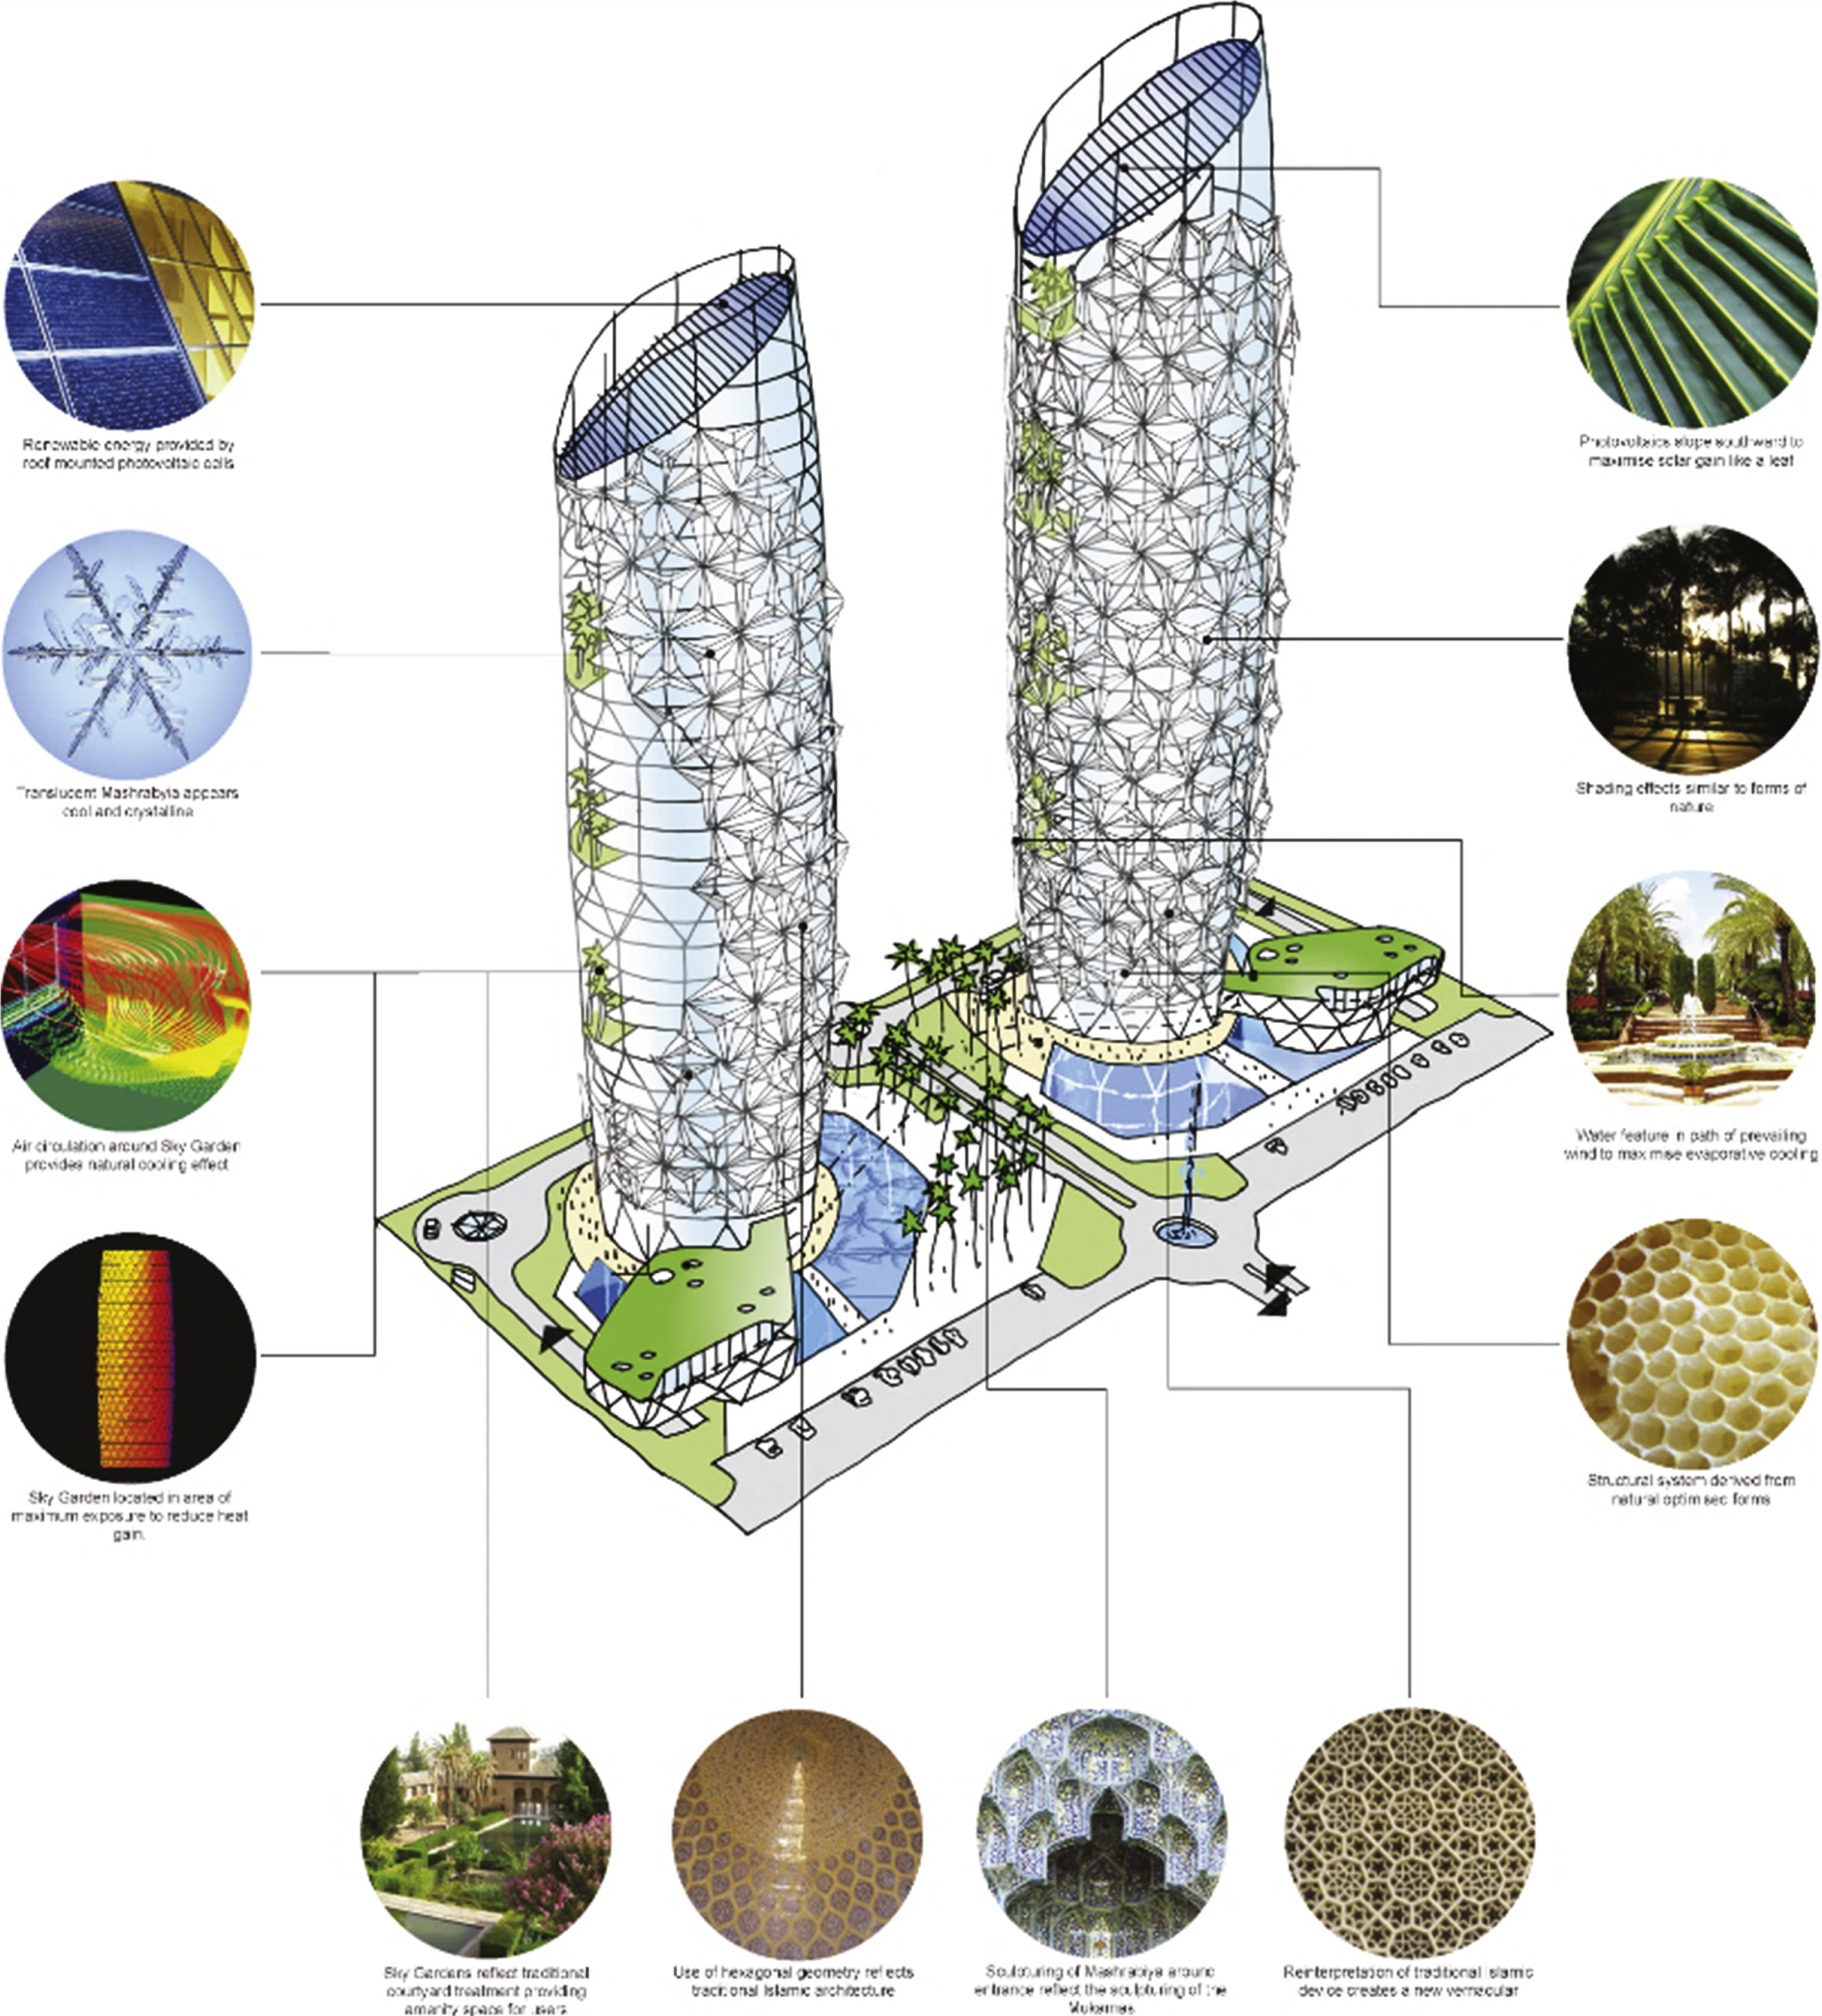 The Al-Bahr Towers competition stage concept diagram illustrates the driving principles of the design idea.